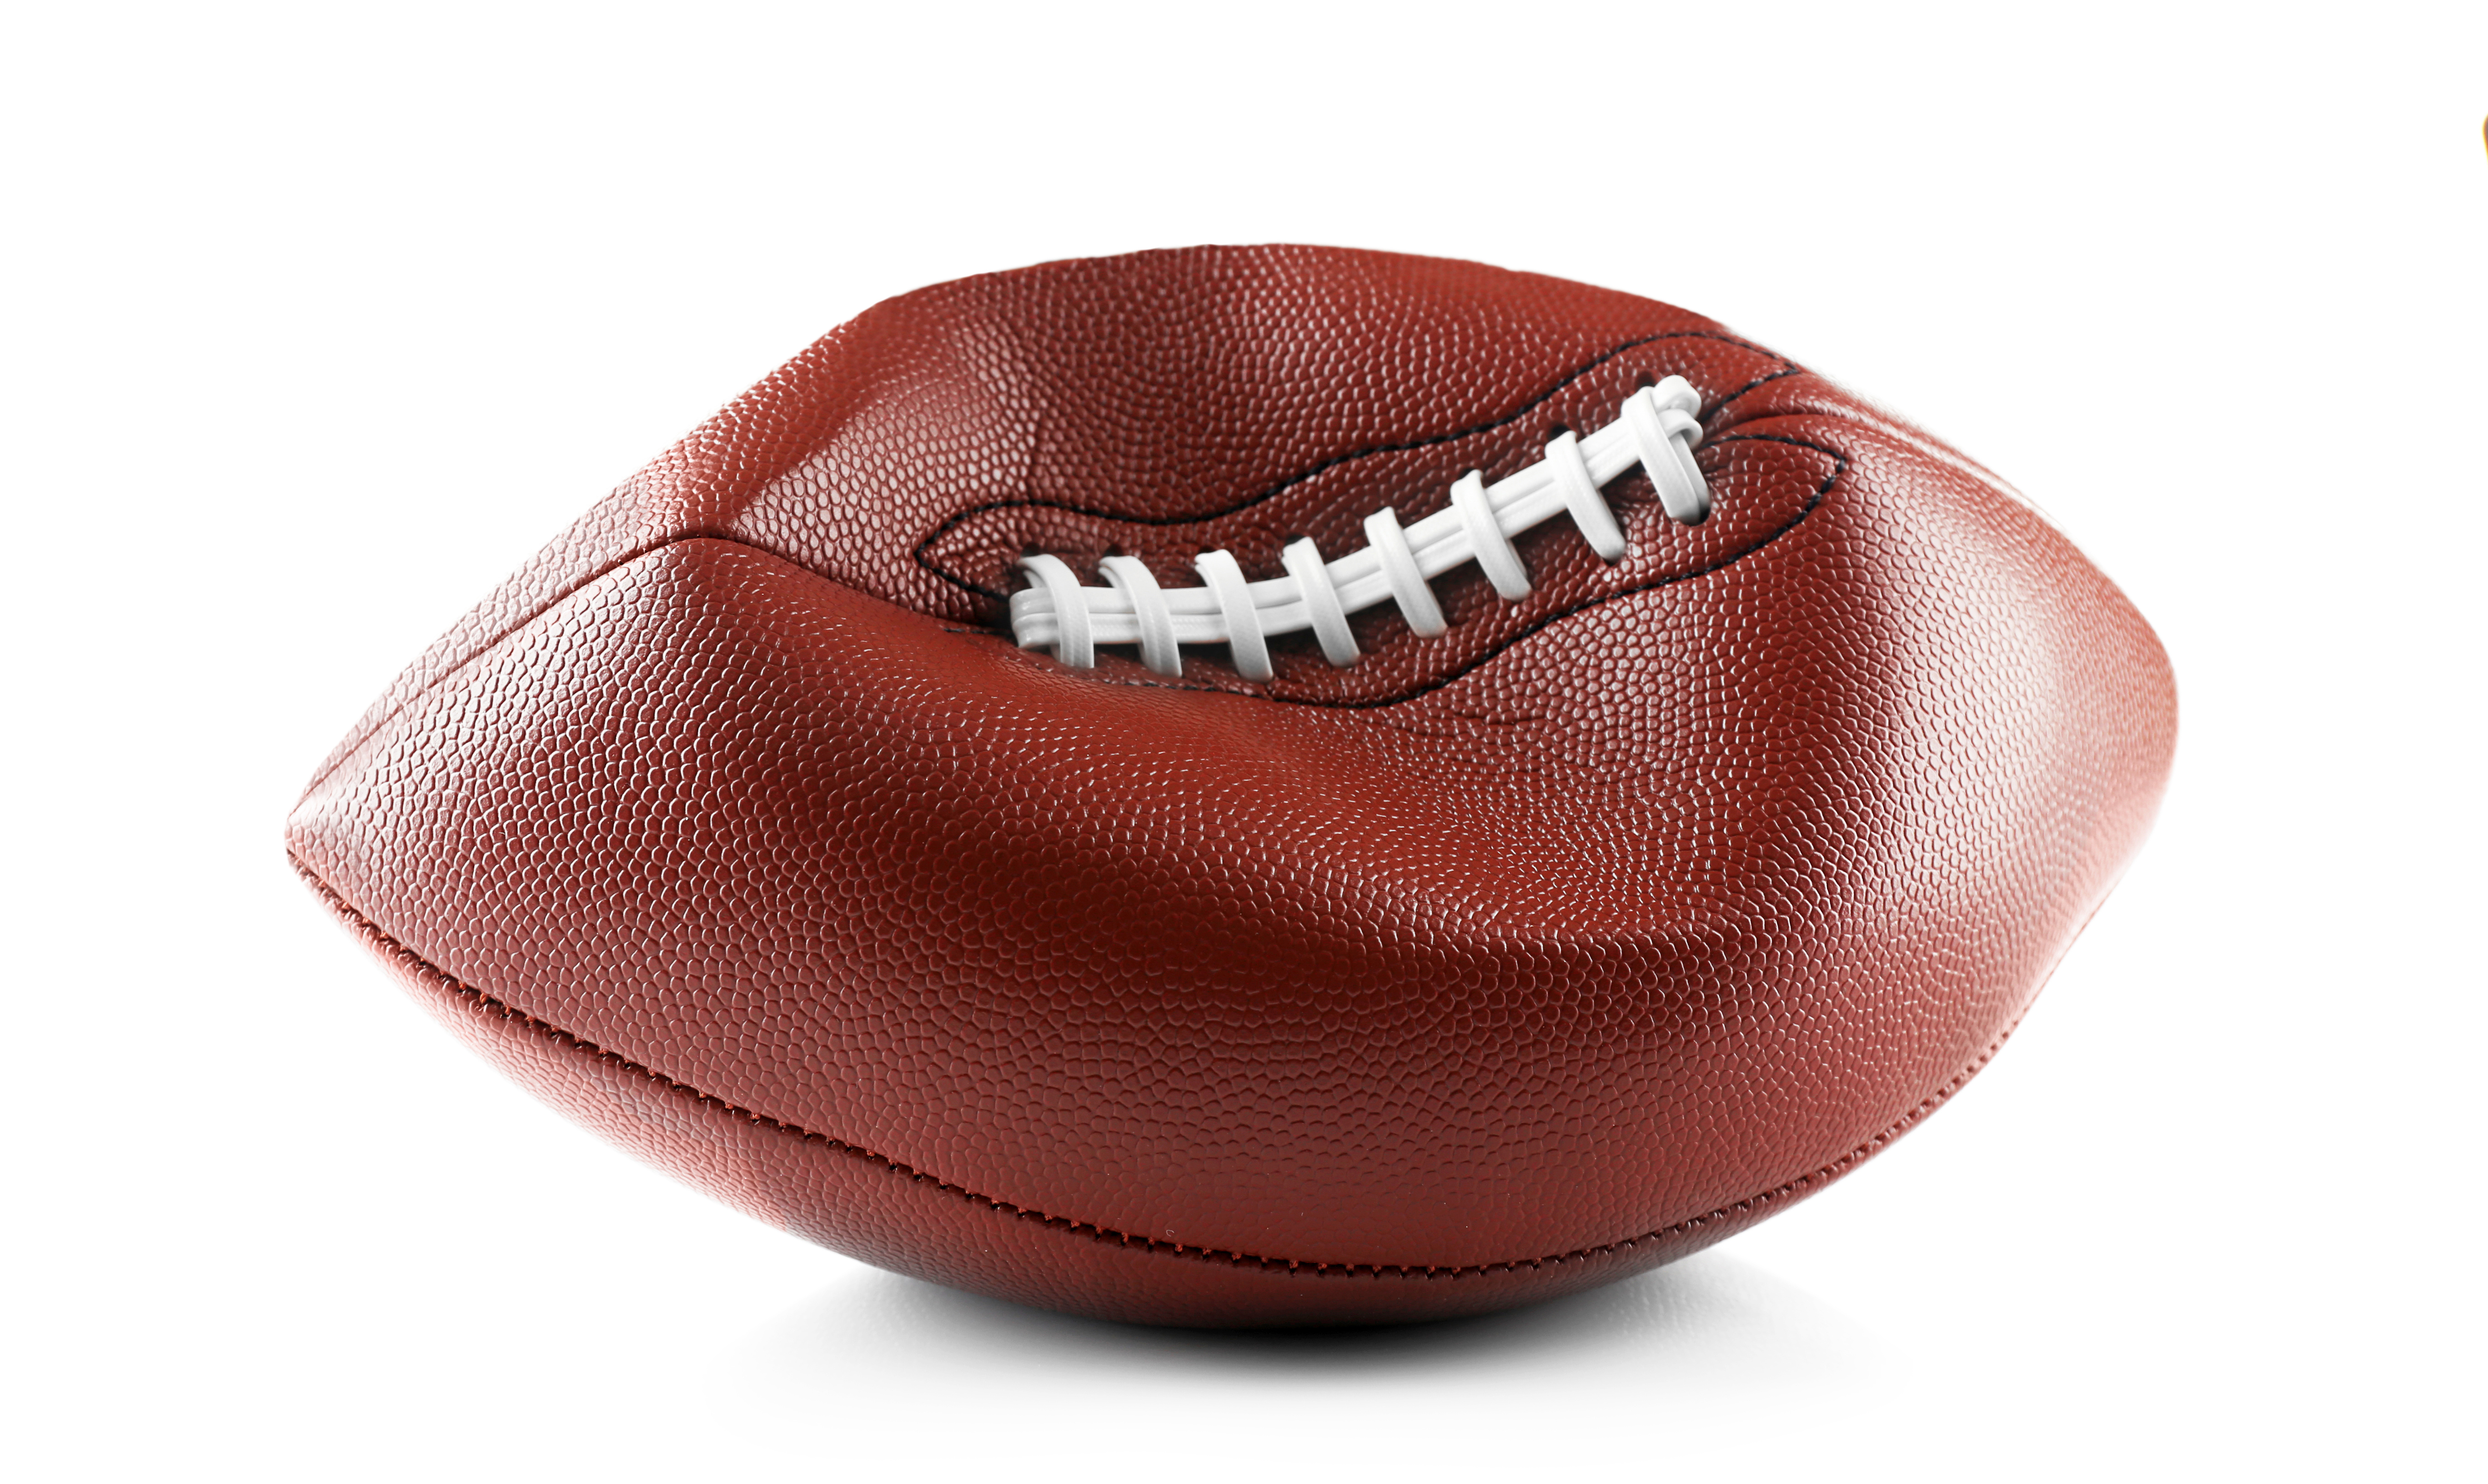 deflated football with less air and weight 